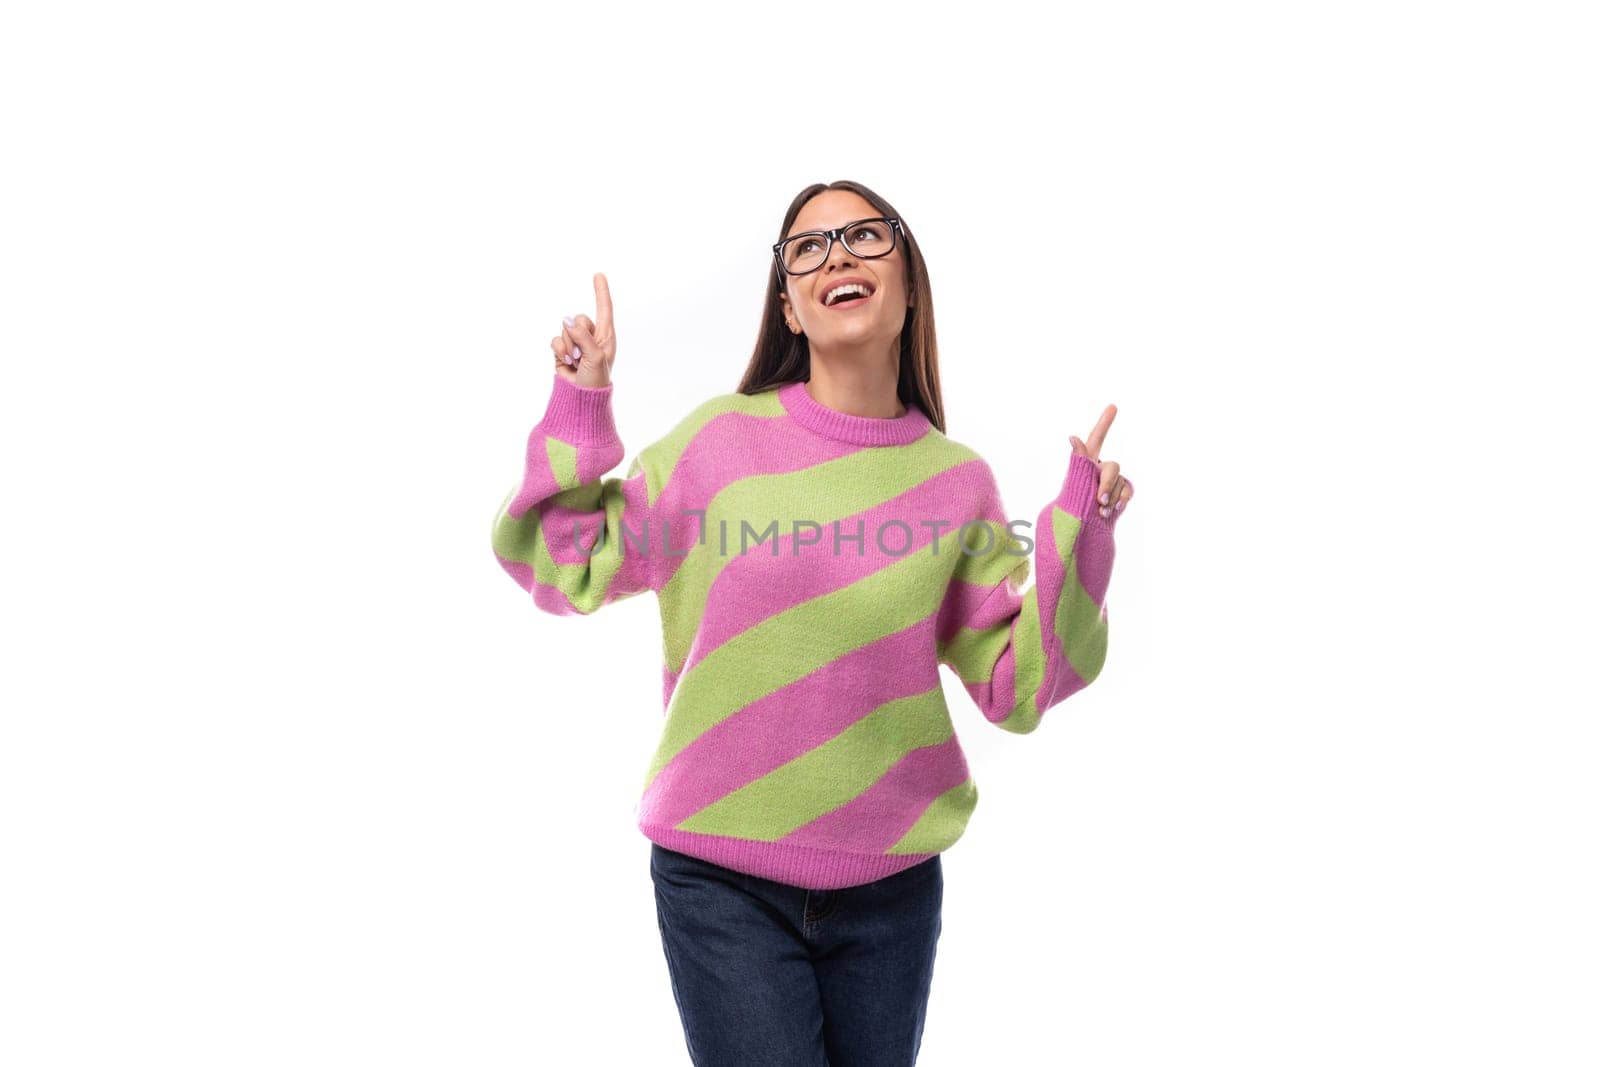 pretty dreamy 35 year old feminine model woman with glasses is dressed in a striped pink-green sweater on a white background.